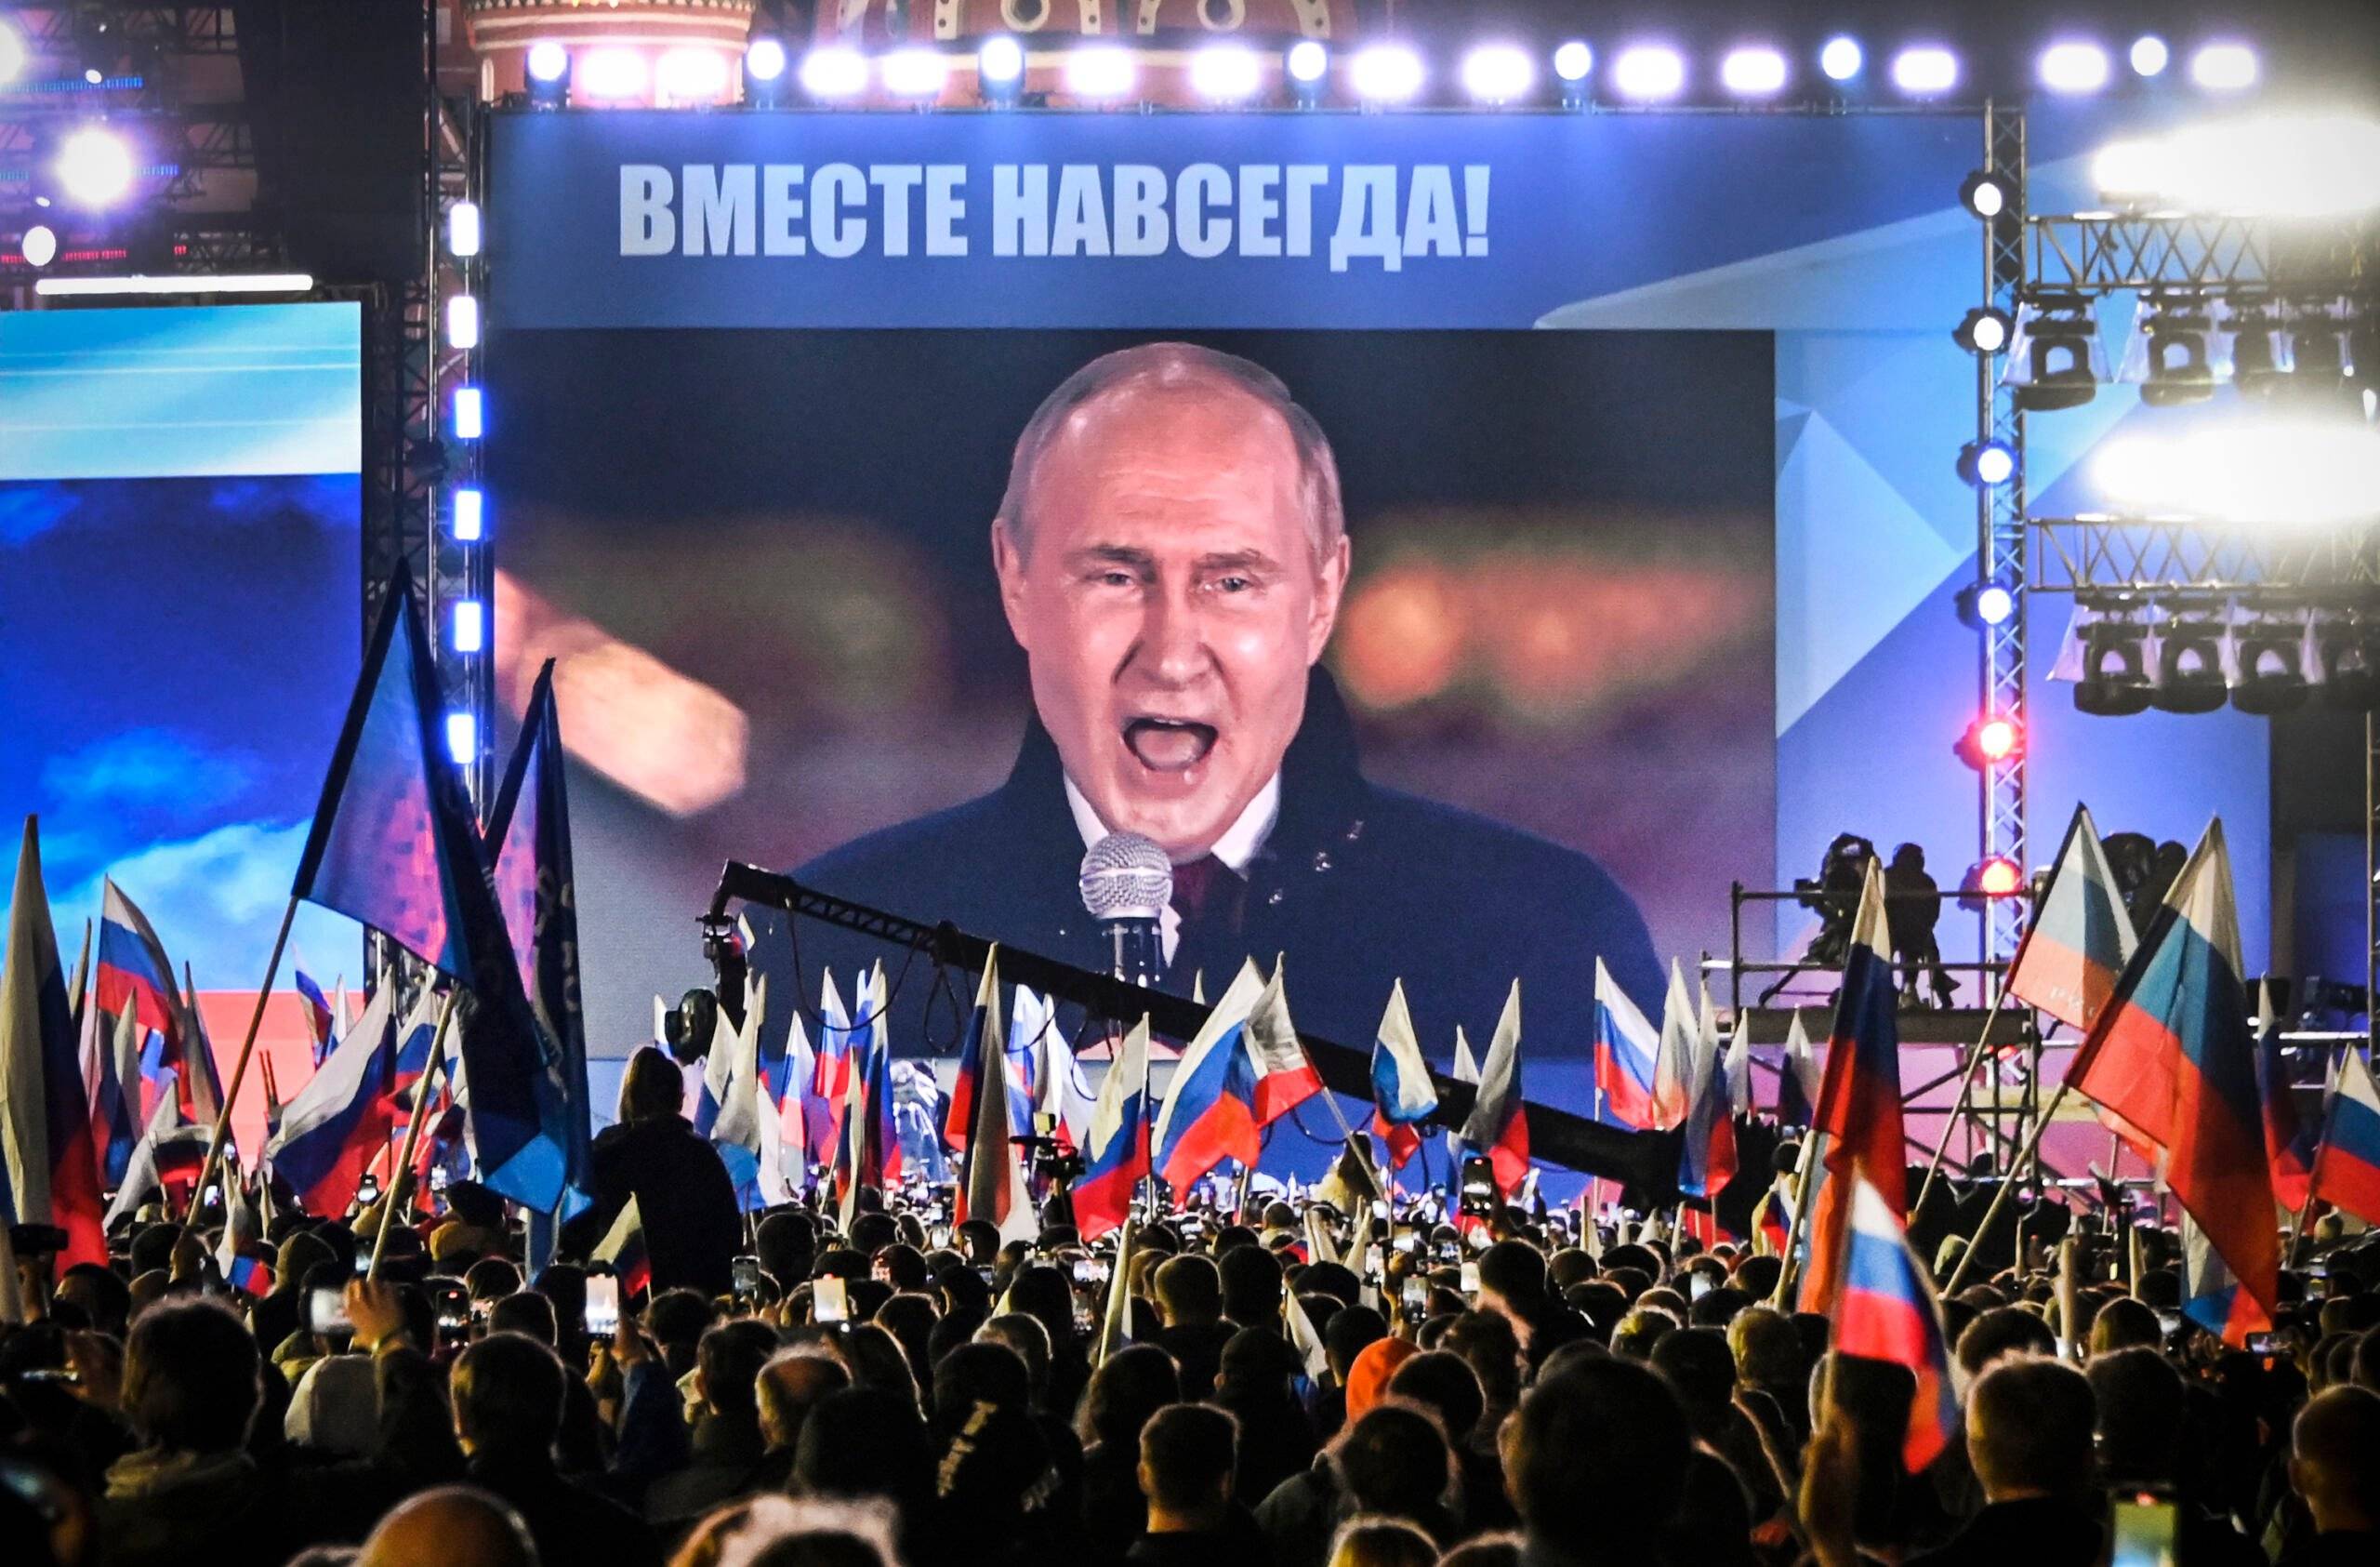 Russian President Vladimir Putin is seen on a screen set at Red Square as he addresses a rally and a concert marking the annexation of four regions of Ukraine Russian troops occupy - Lugansk, Donetsk, Kherson and Zaporizhzhia, in central Moscow on September 30, 2022. (Photo by Alexander NEMENOV / AFP)